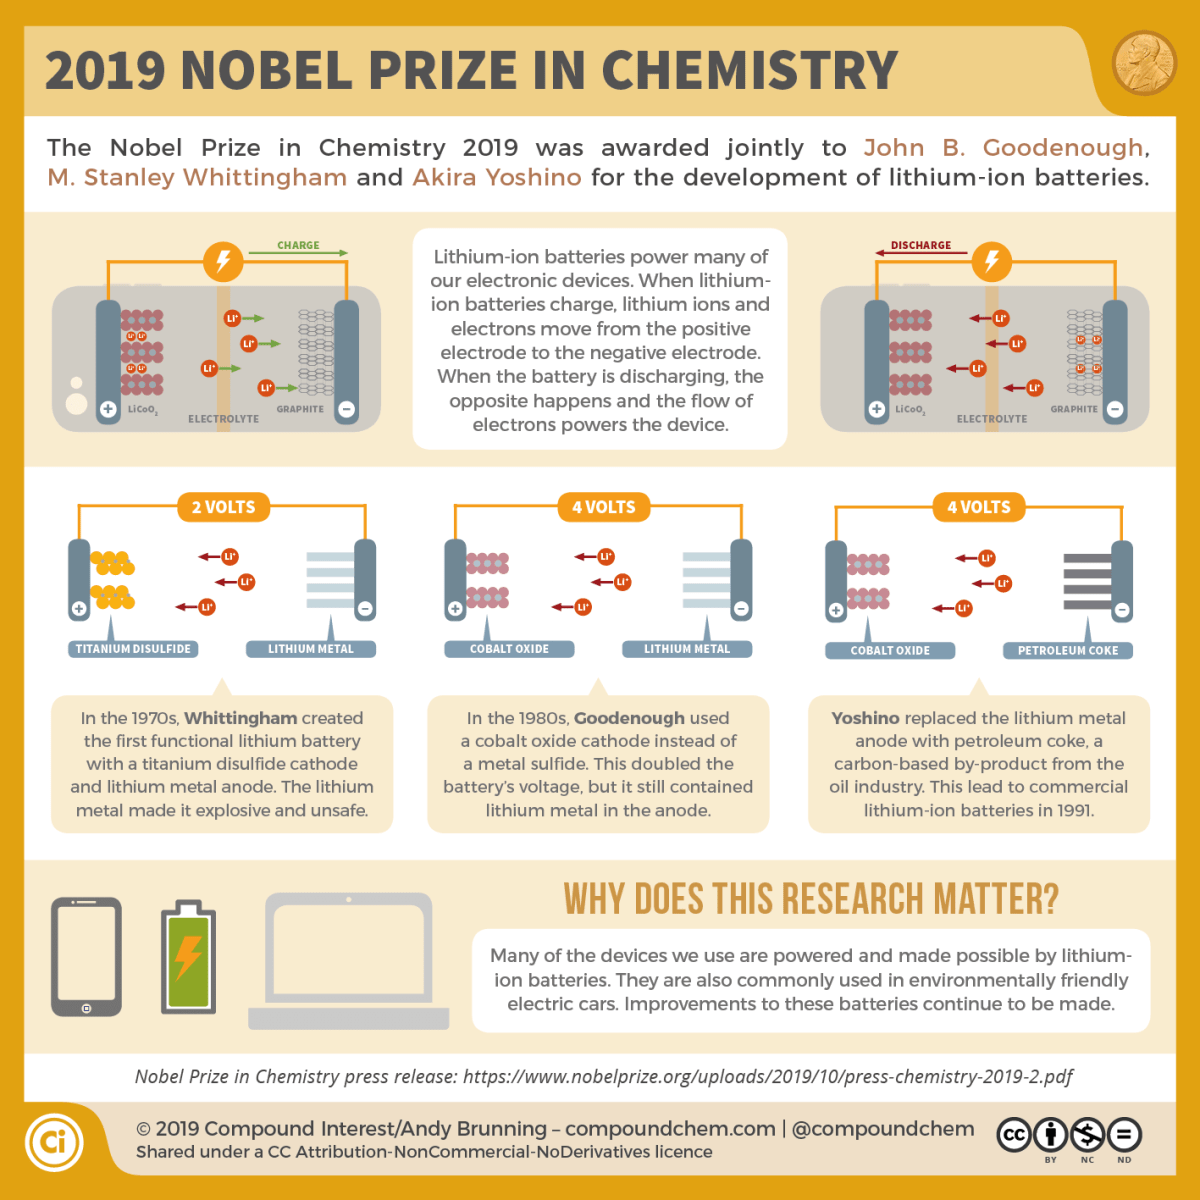 Infographic on the nobel prize in chemistry 2019, awarded for the development of lithium-ion batteries. The batteries move lithium ions and electrons to power devices. Goodenough's research in the 1980s saw him use a cobalt oxide cathode to double the voltage of lithium-ion batteries at the time.